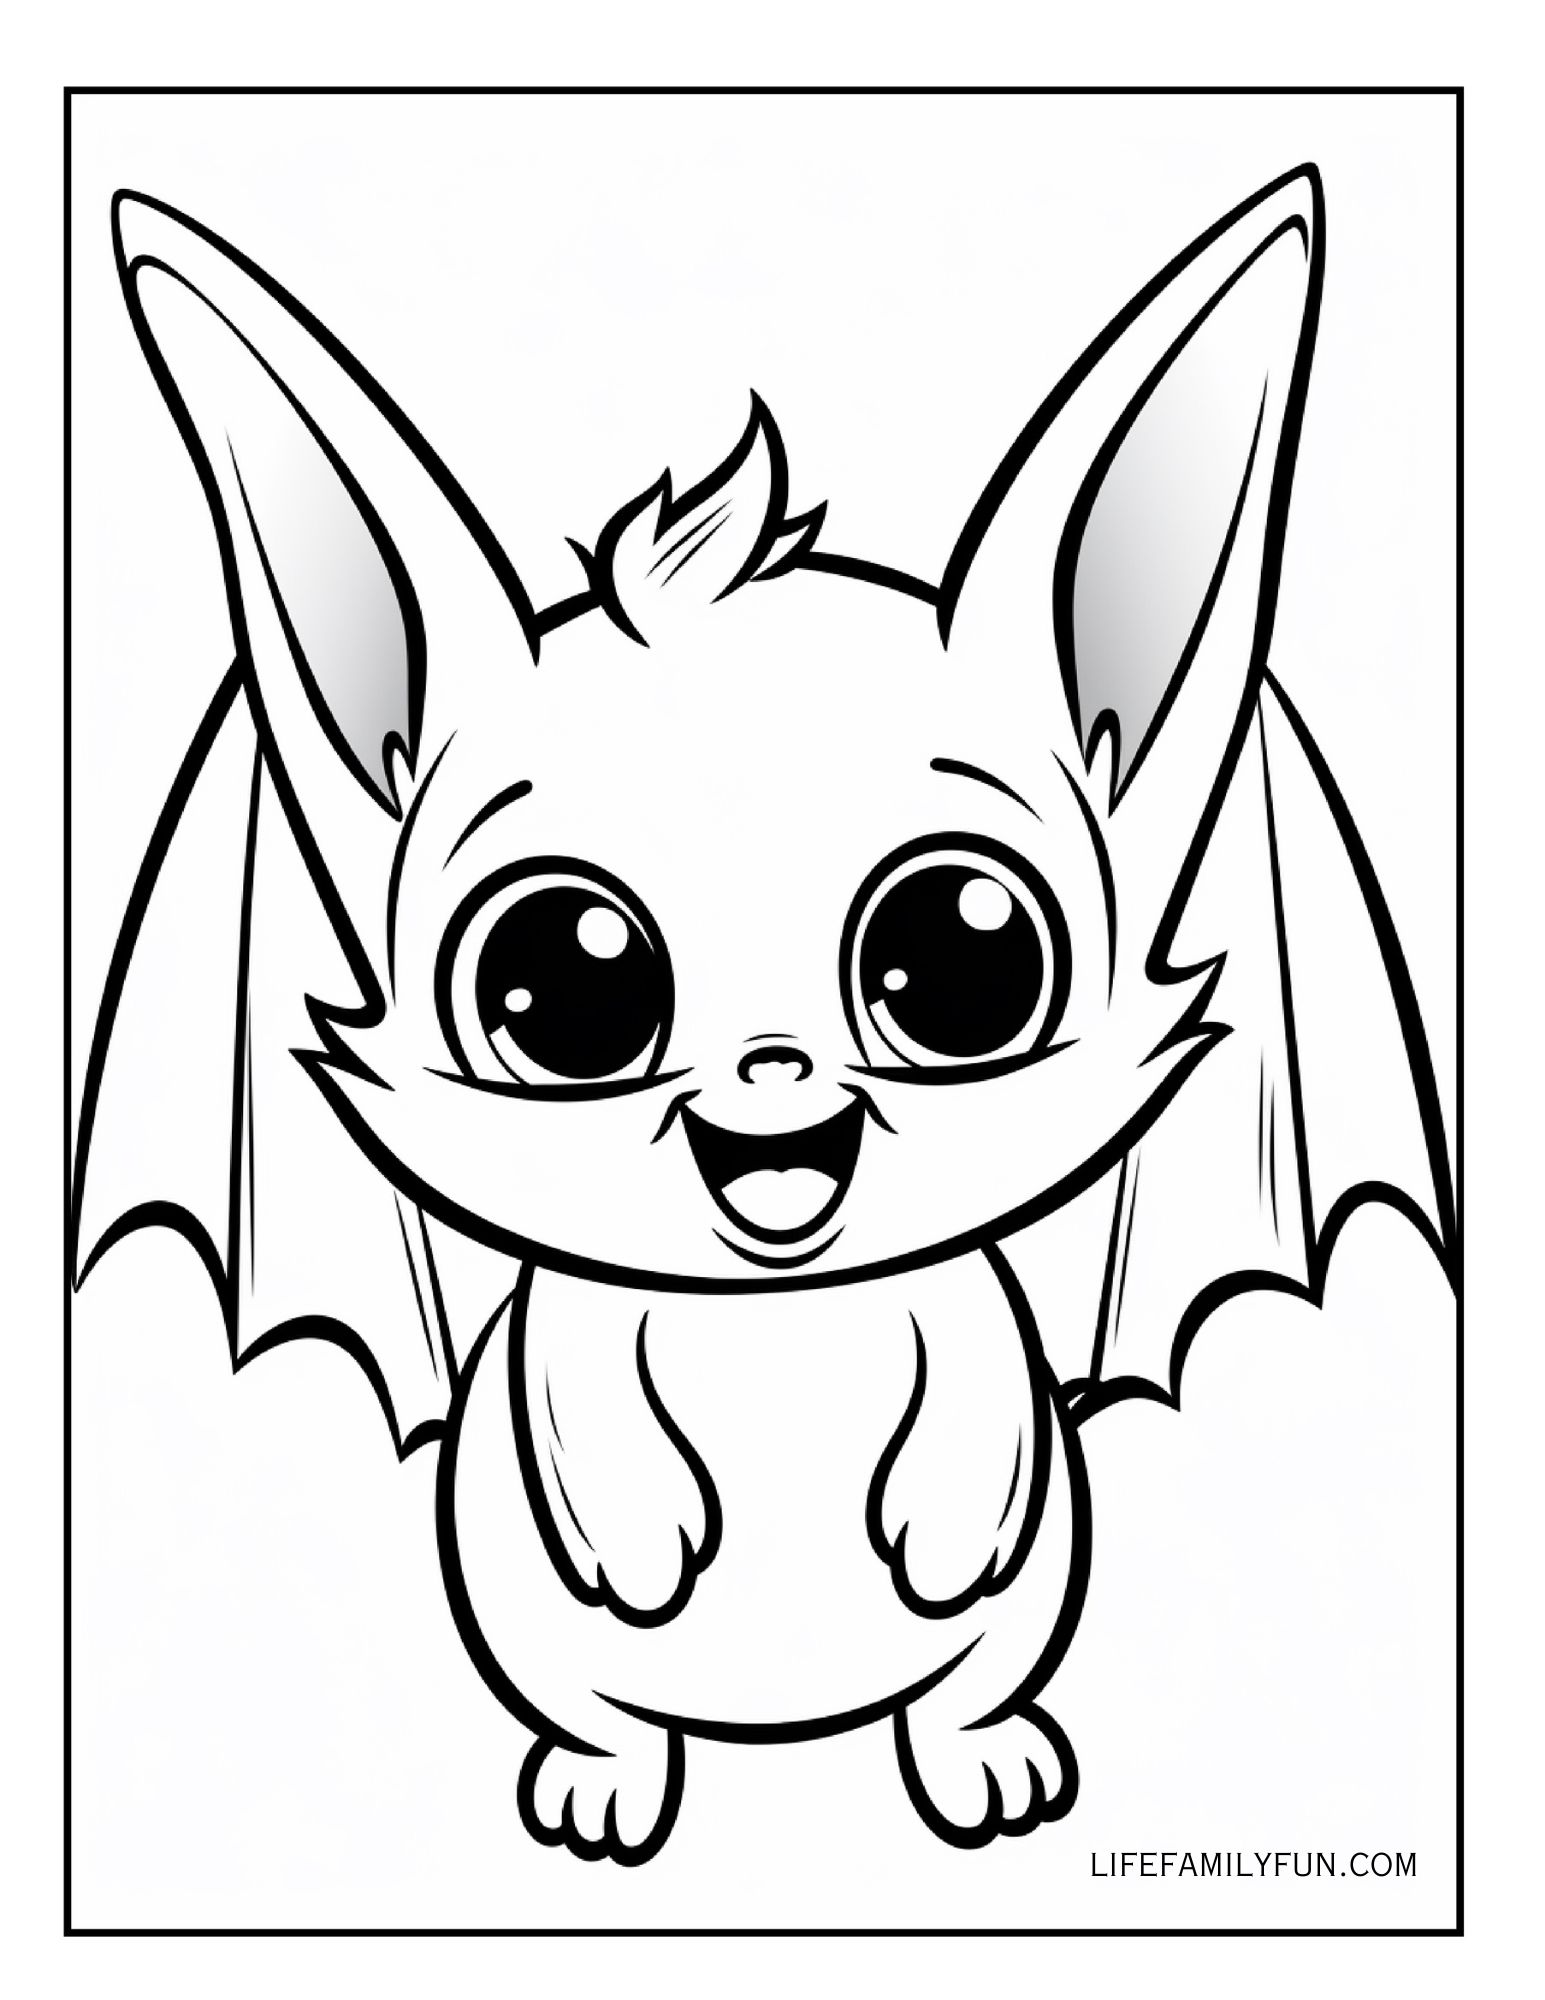 Little Bat Coloring page for Halloween